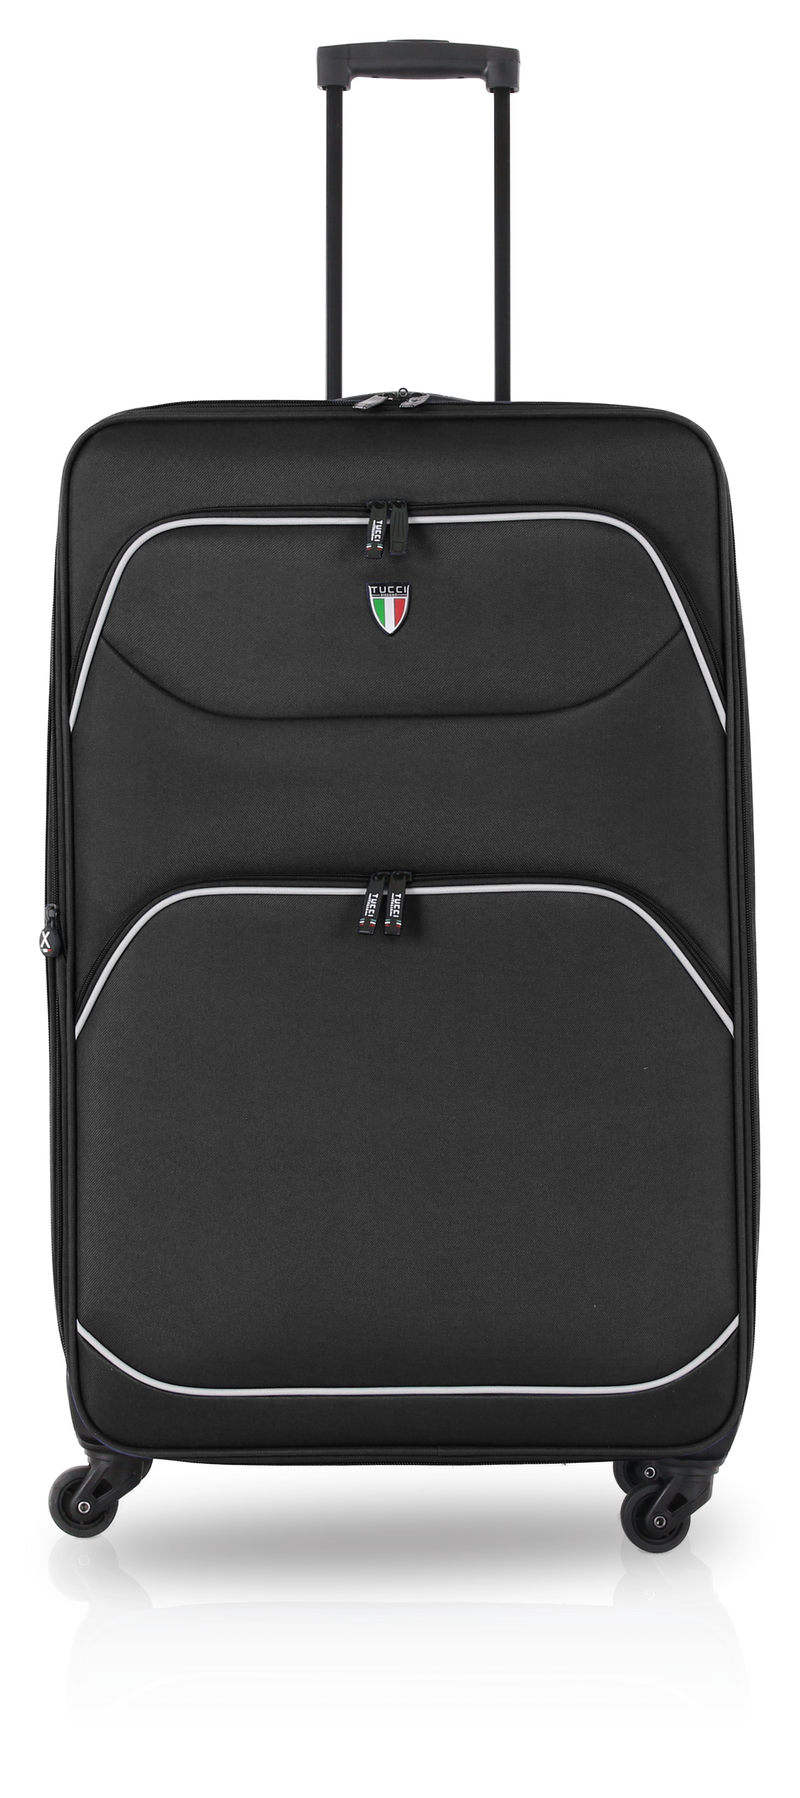 TUCCI Italy BEN FATTO FABRIC 28" Large Luggage Suitcase